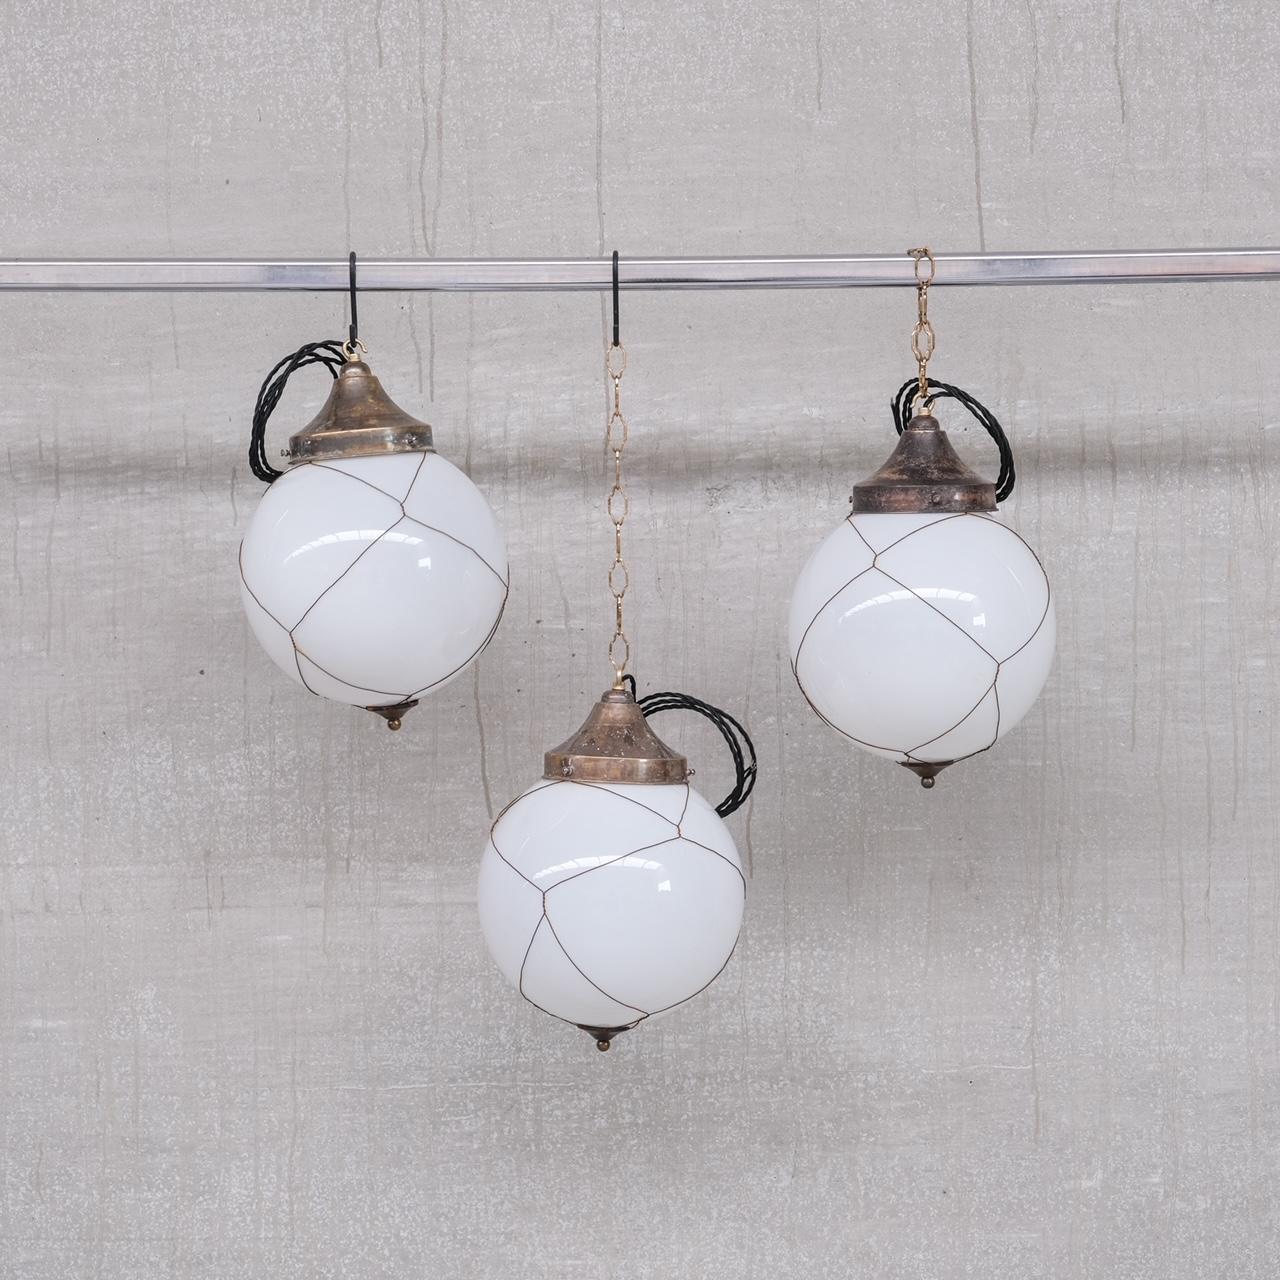 Opaline and brass caged glass pendant lights.

Holland, circa 1950s.

Natural patina to the metal.

PRICED AND SOLD INDIVIDUALLY.

7 available at the time of listing. Please check for updated stock amounts.

Re-wired and PAT